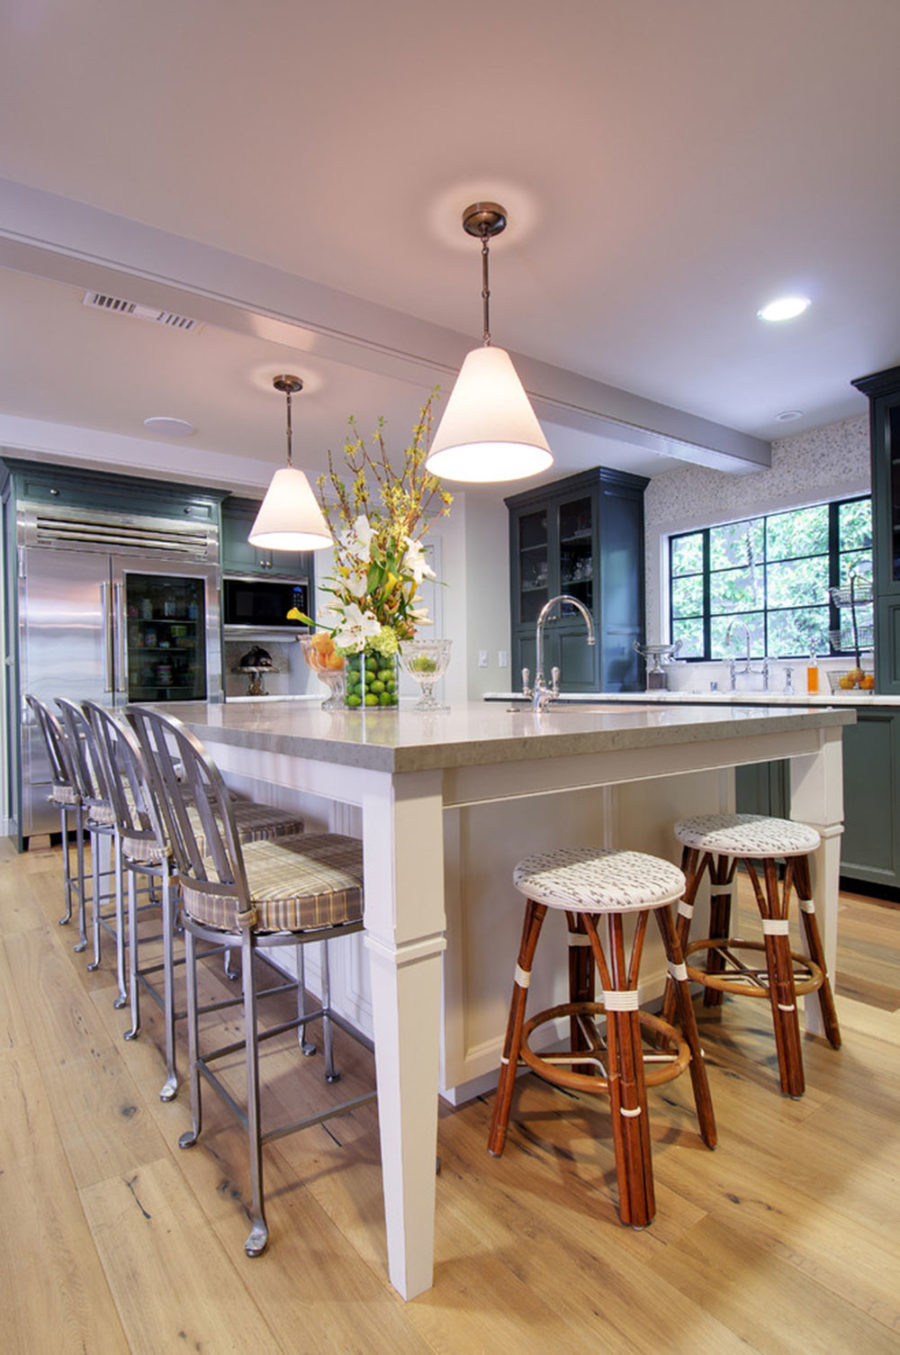 Small Kitchen Islands With Seating
 15 Kitchen Islands With Seating For Your Family Home